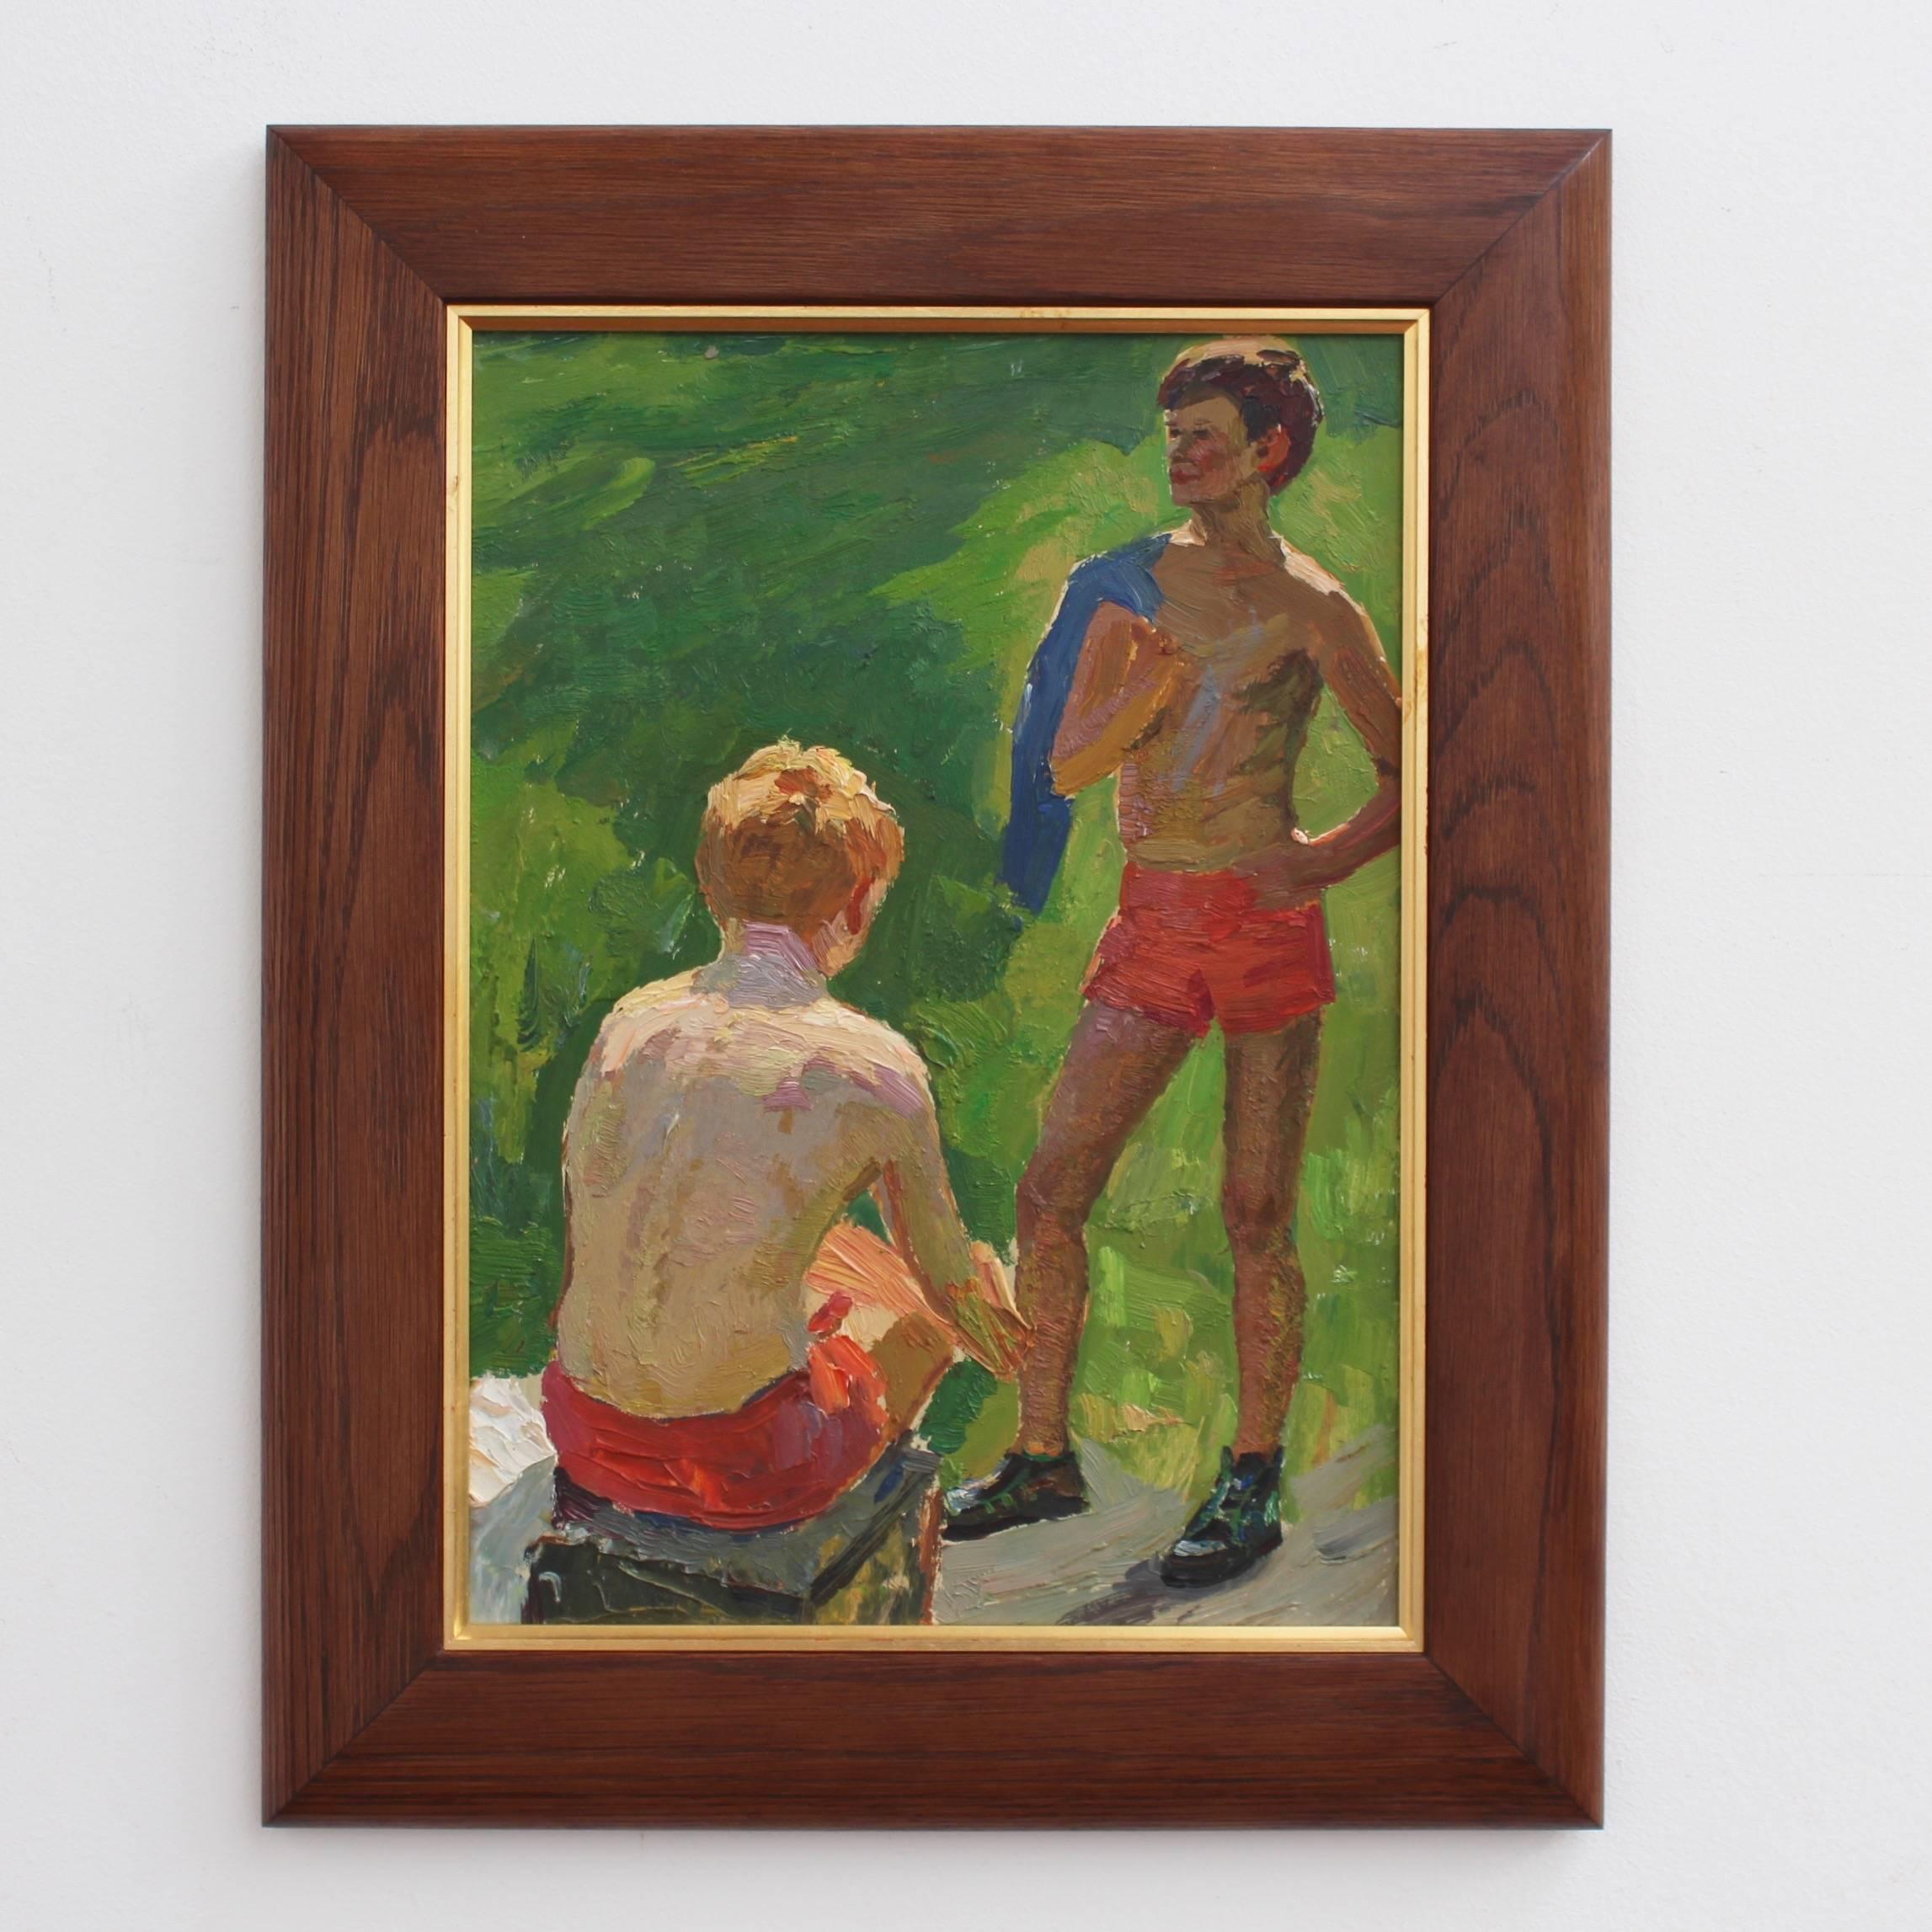 Boys in Summertime - Painting by Unknown